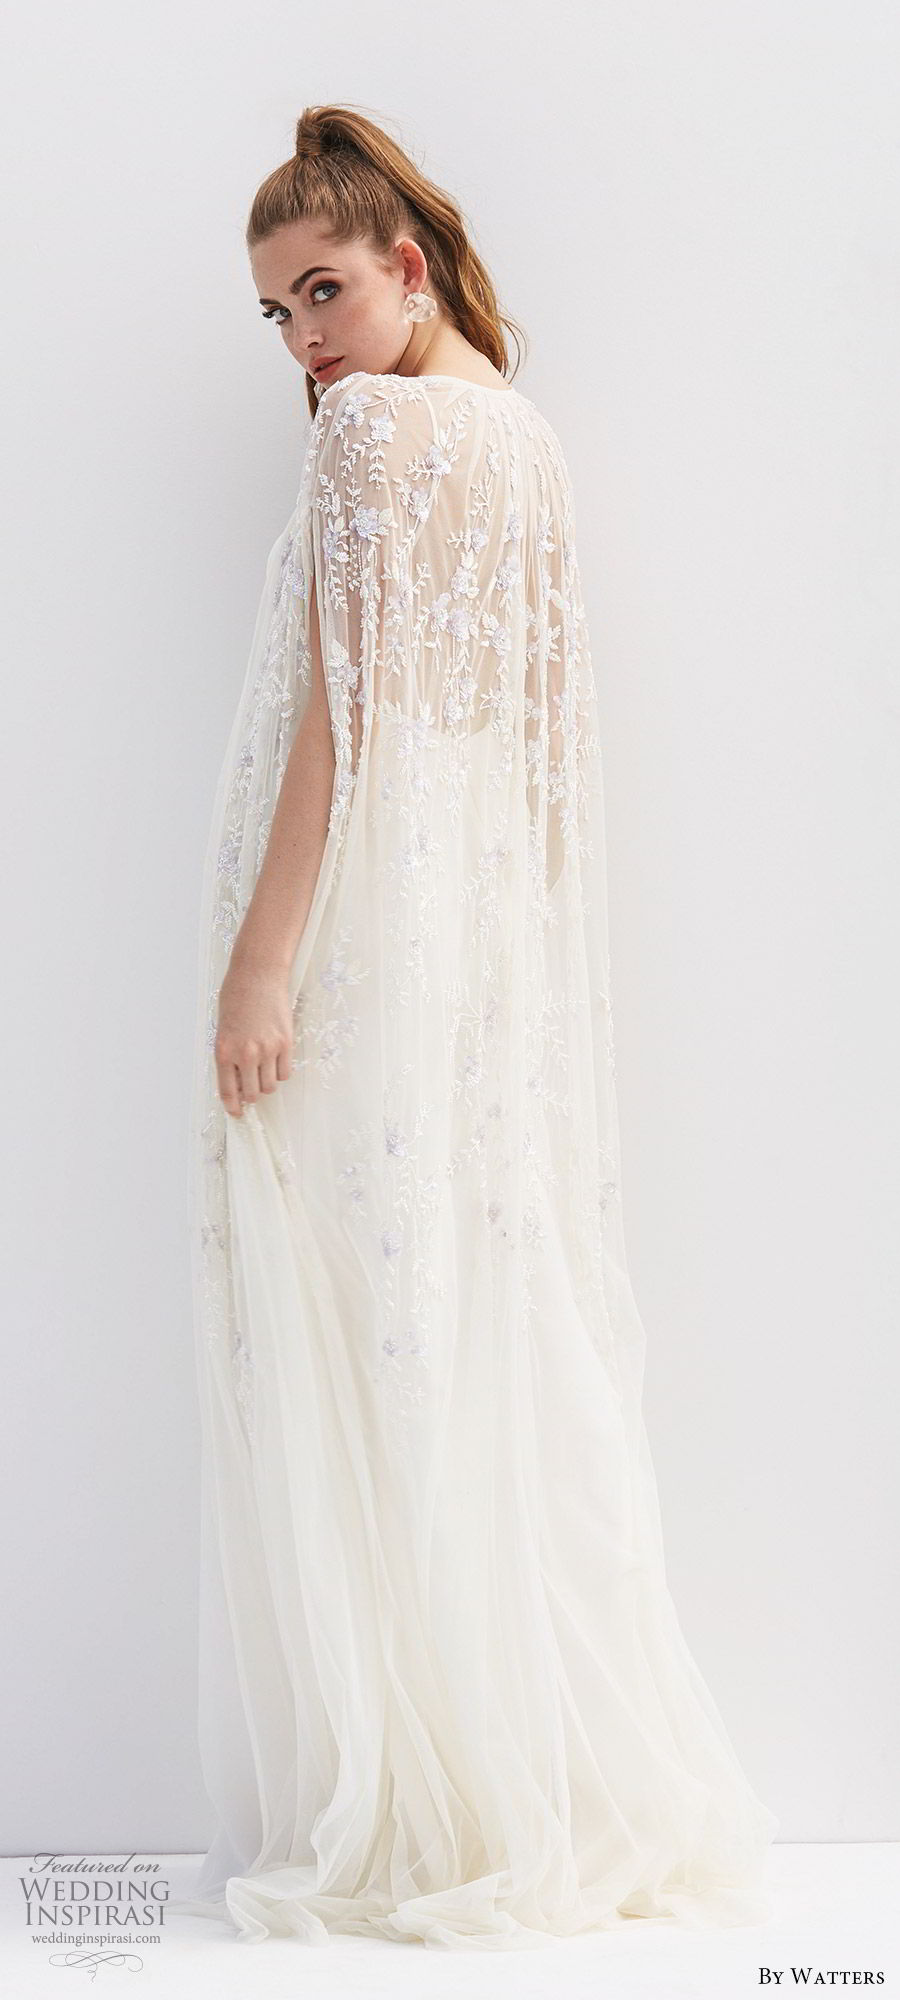 Looking for Chic Wedding Dresses? — Shop the New By Watters Bridal ...